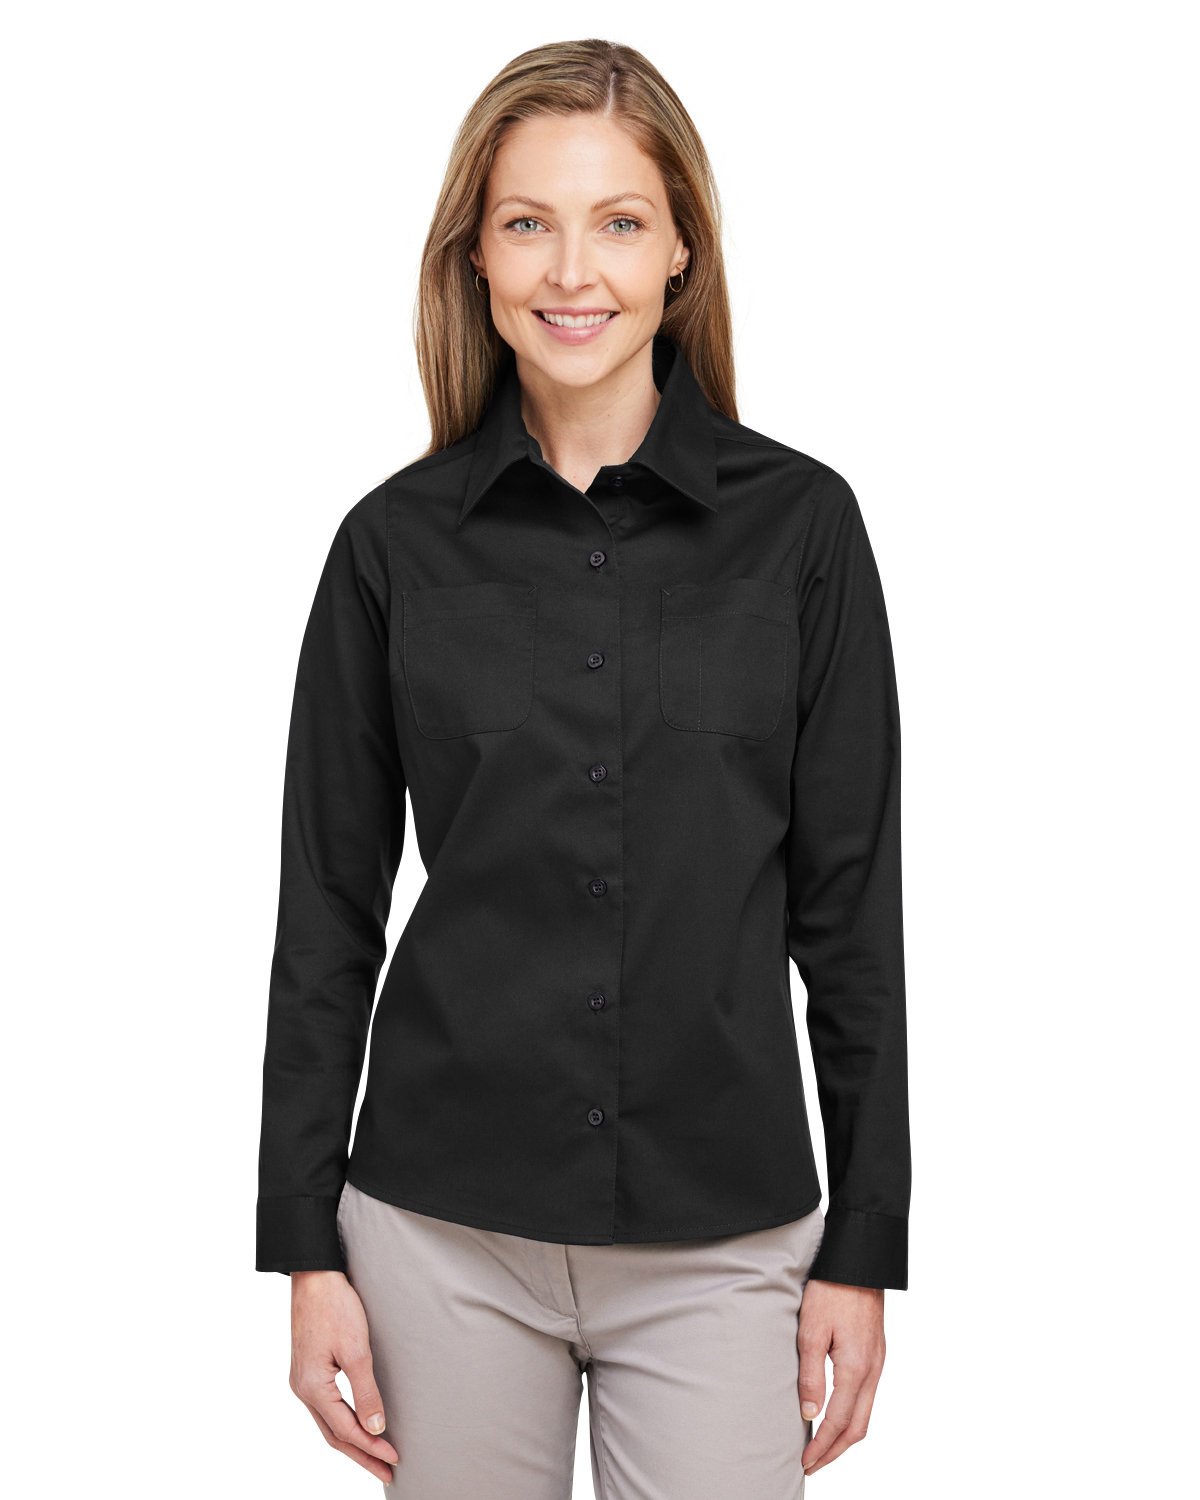 Front view of Ladies’ Advantage IL Long-Sleeve Workshirt